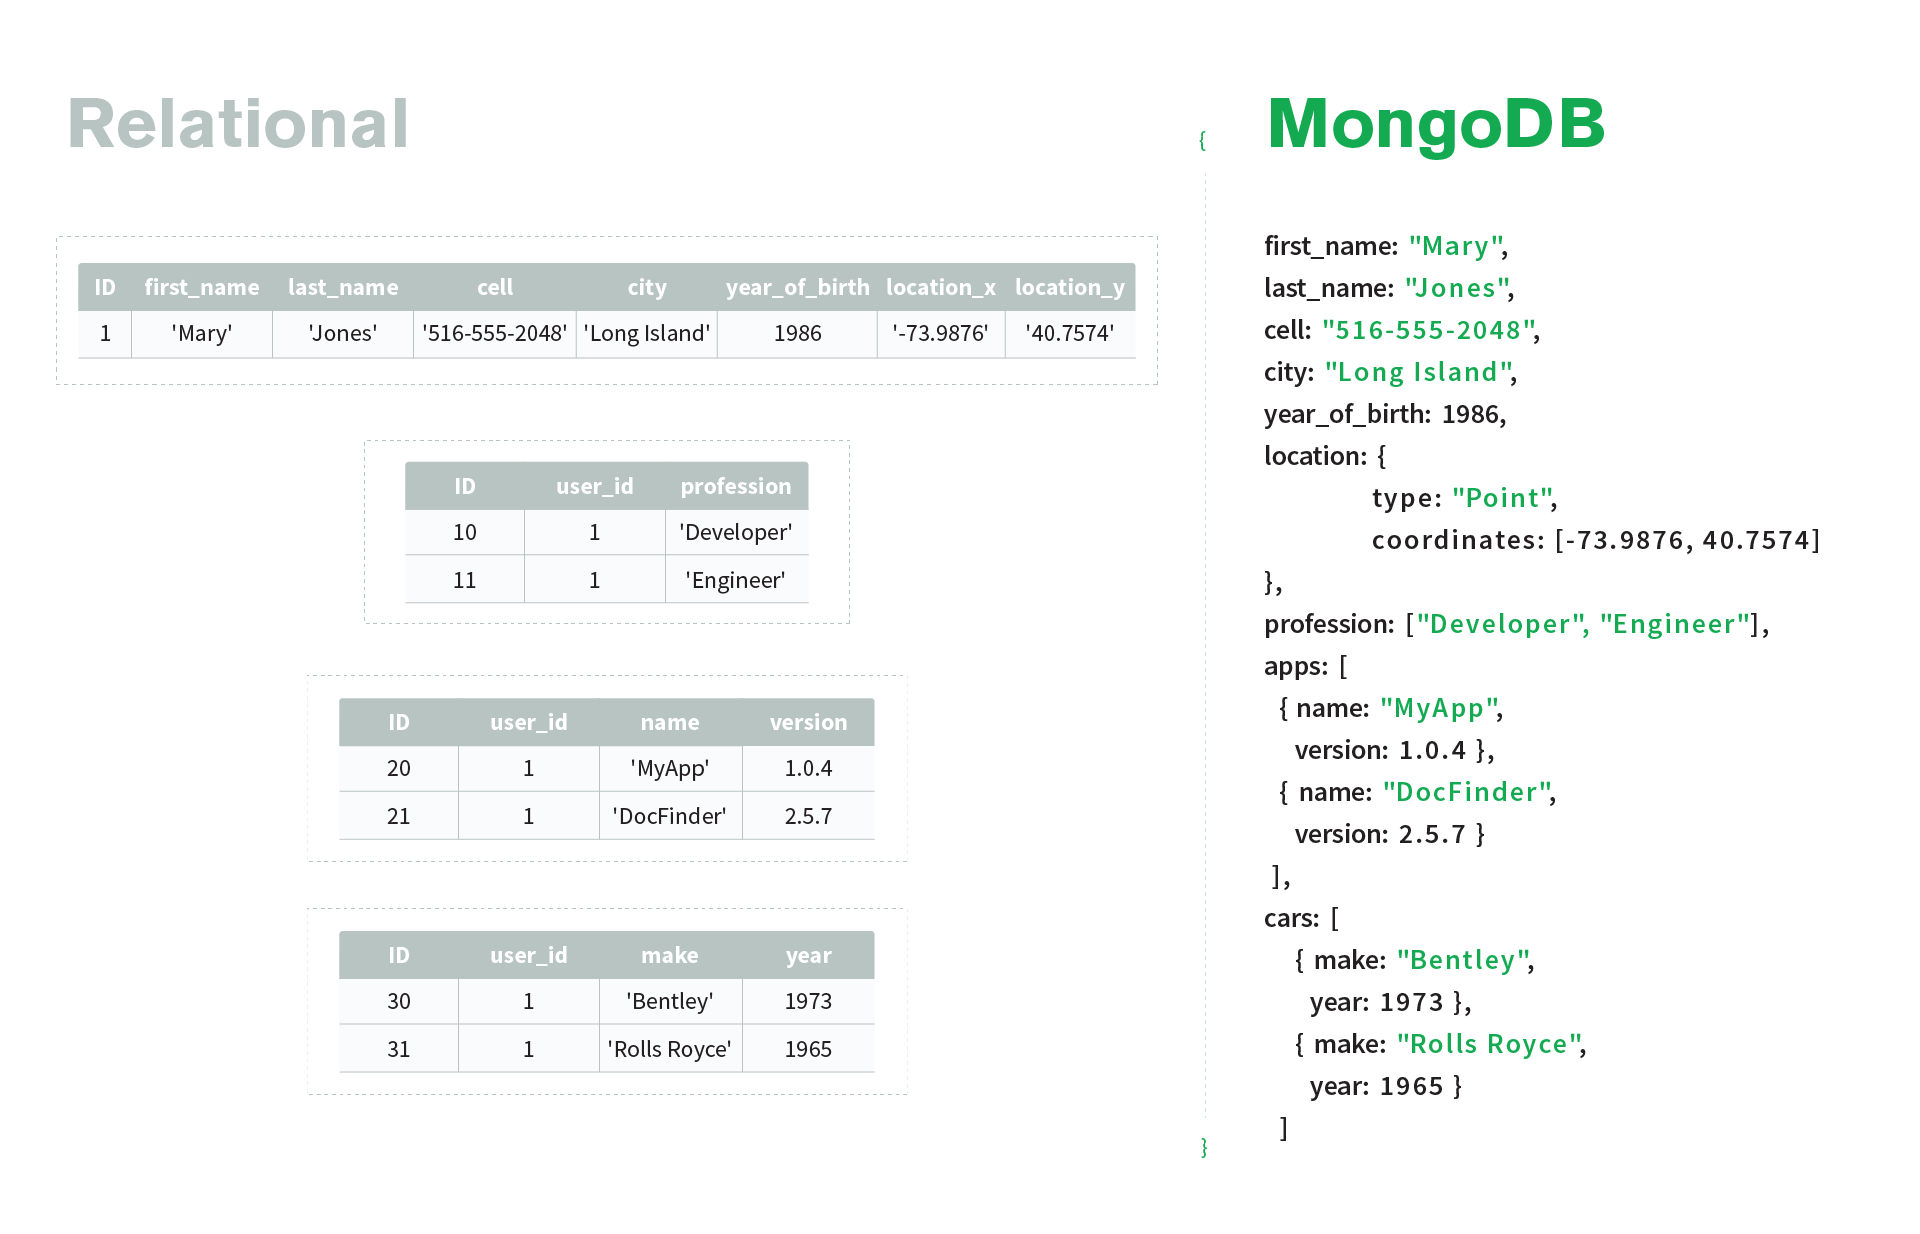 mongo db text or